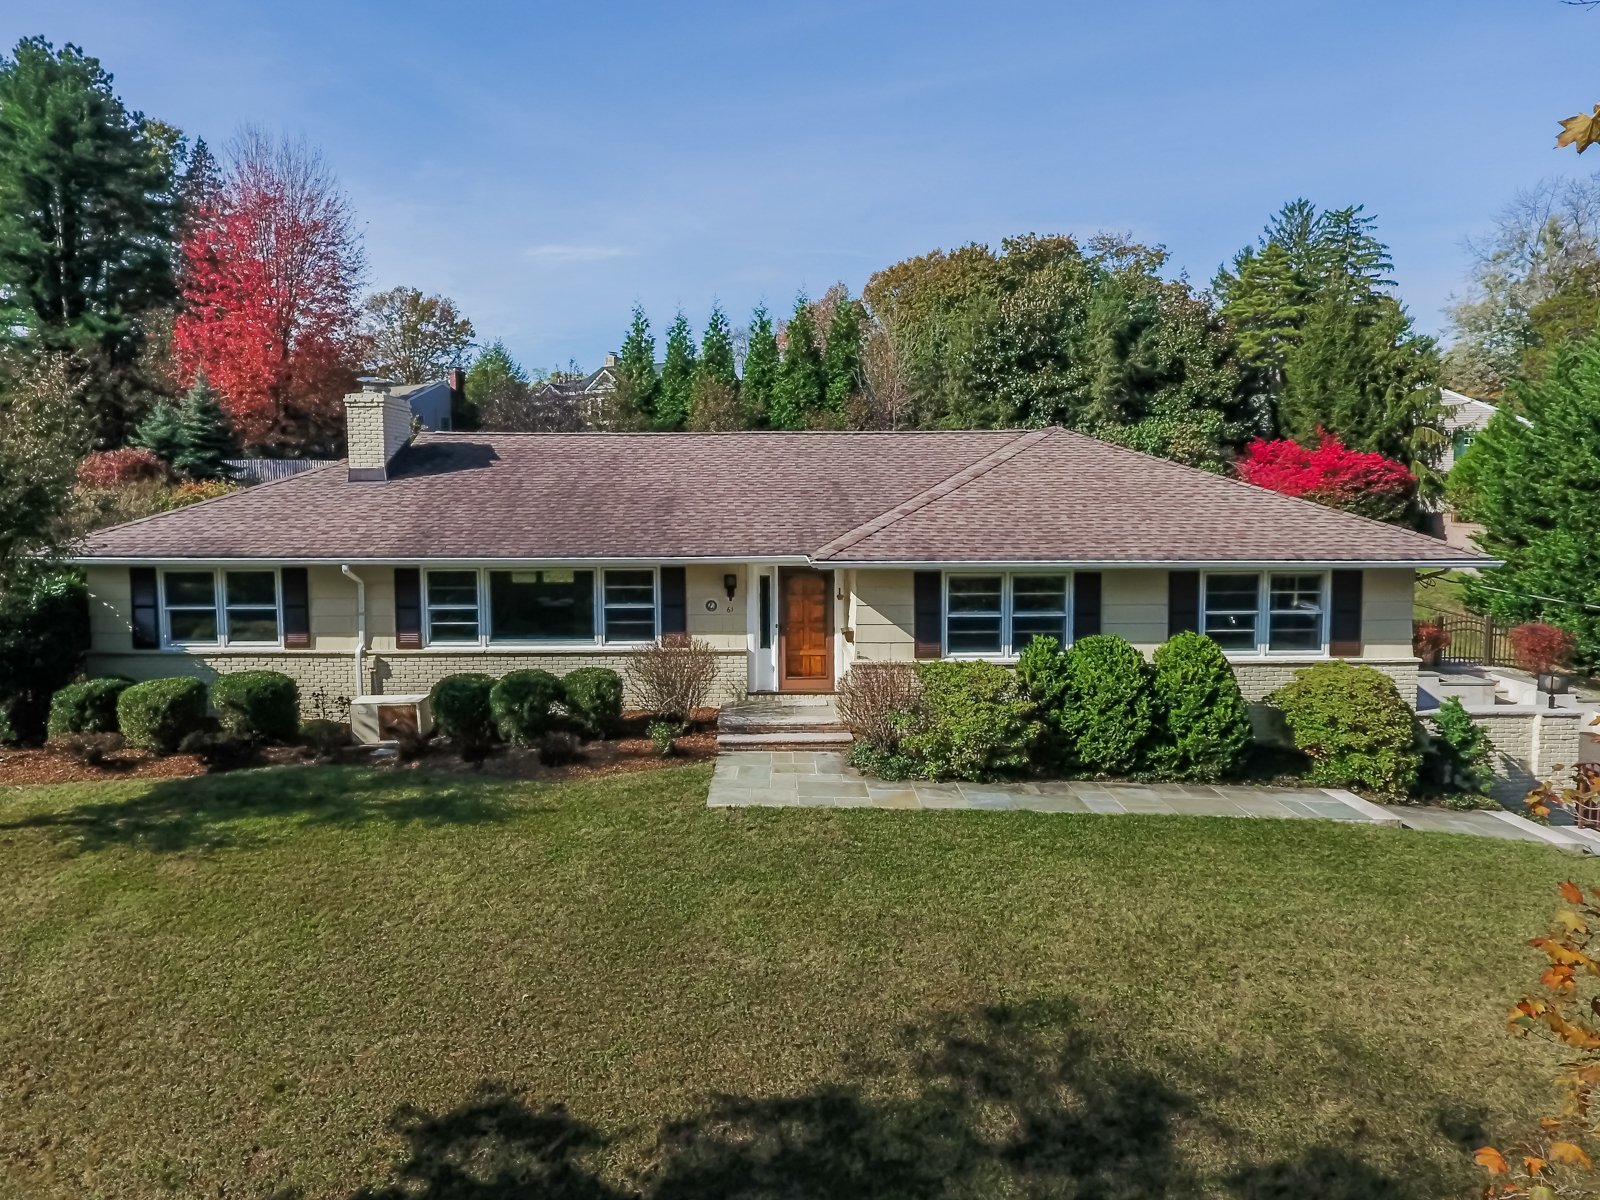 61 Barnsdale Rd, Madison NJ home for sale offered by The Oldendorp Group Realtors in Madison